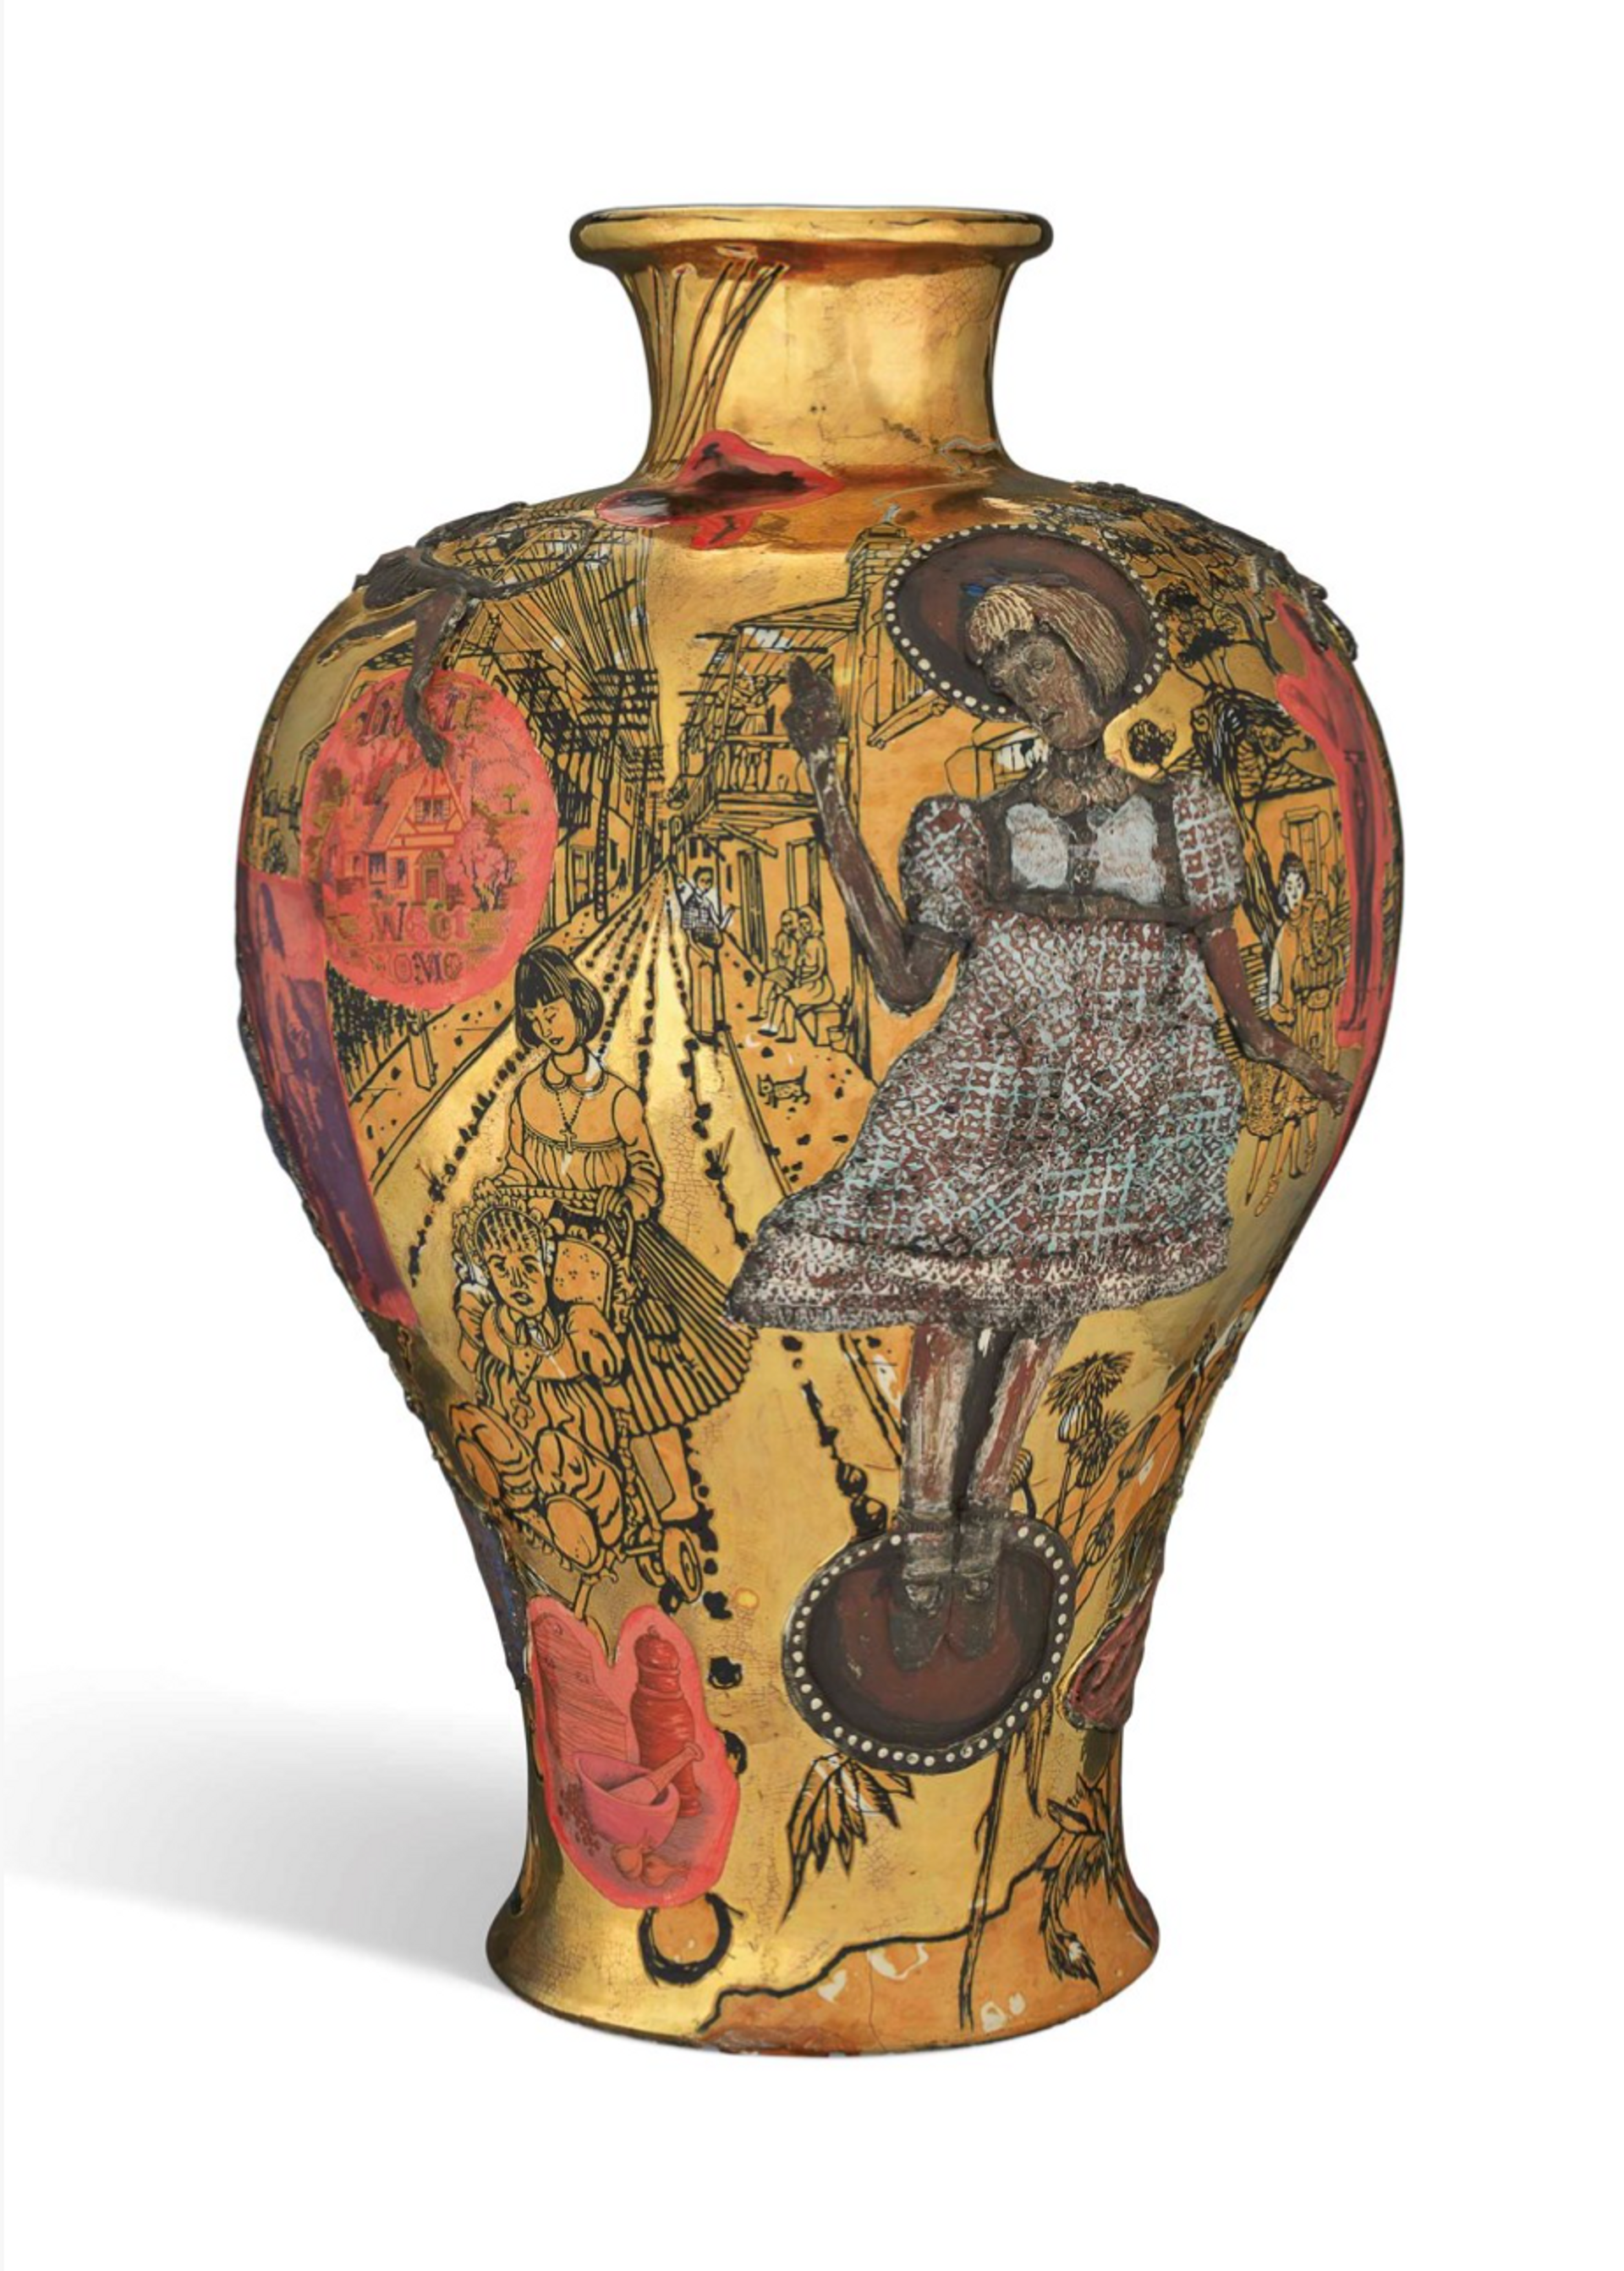 Glazed urn by Grayson Perry, depicting a provocative image of the artist's alter-ego, Claire on a gold background.